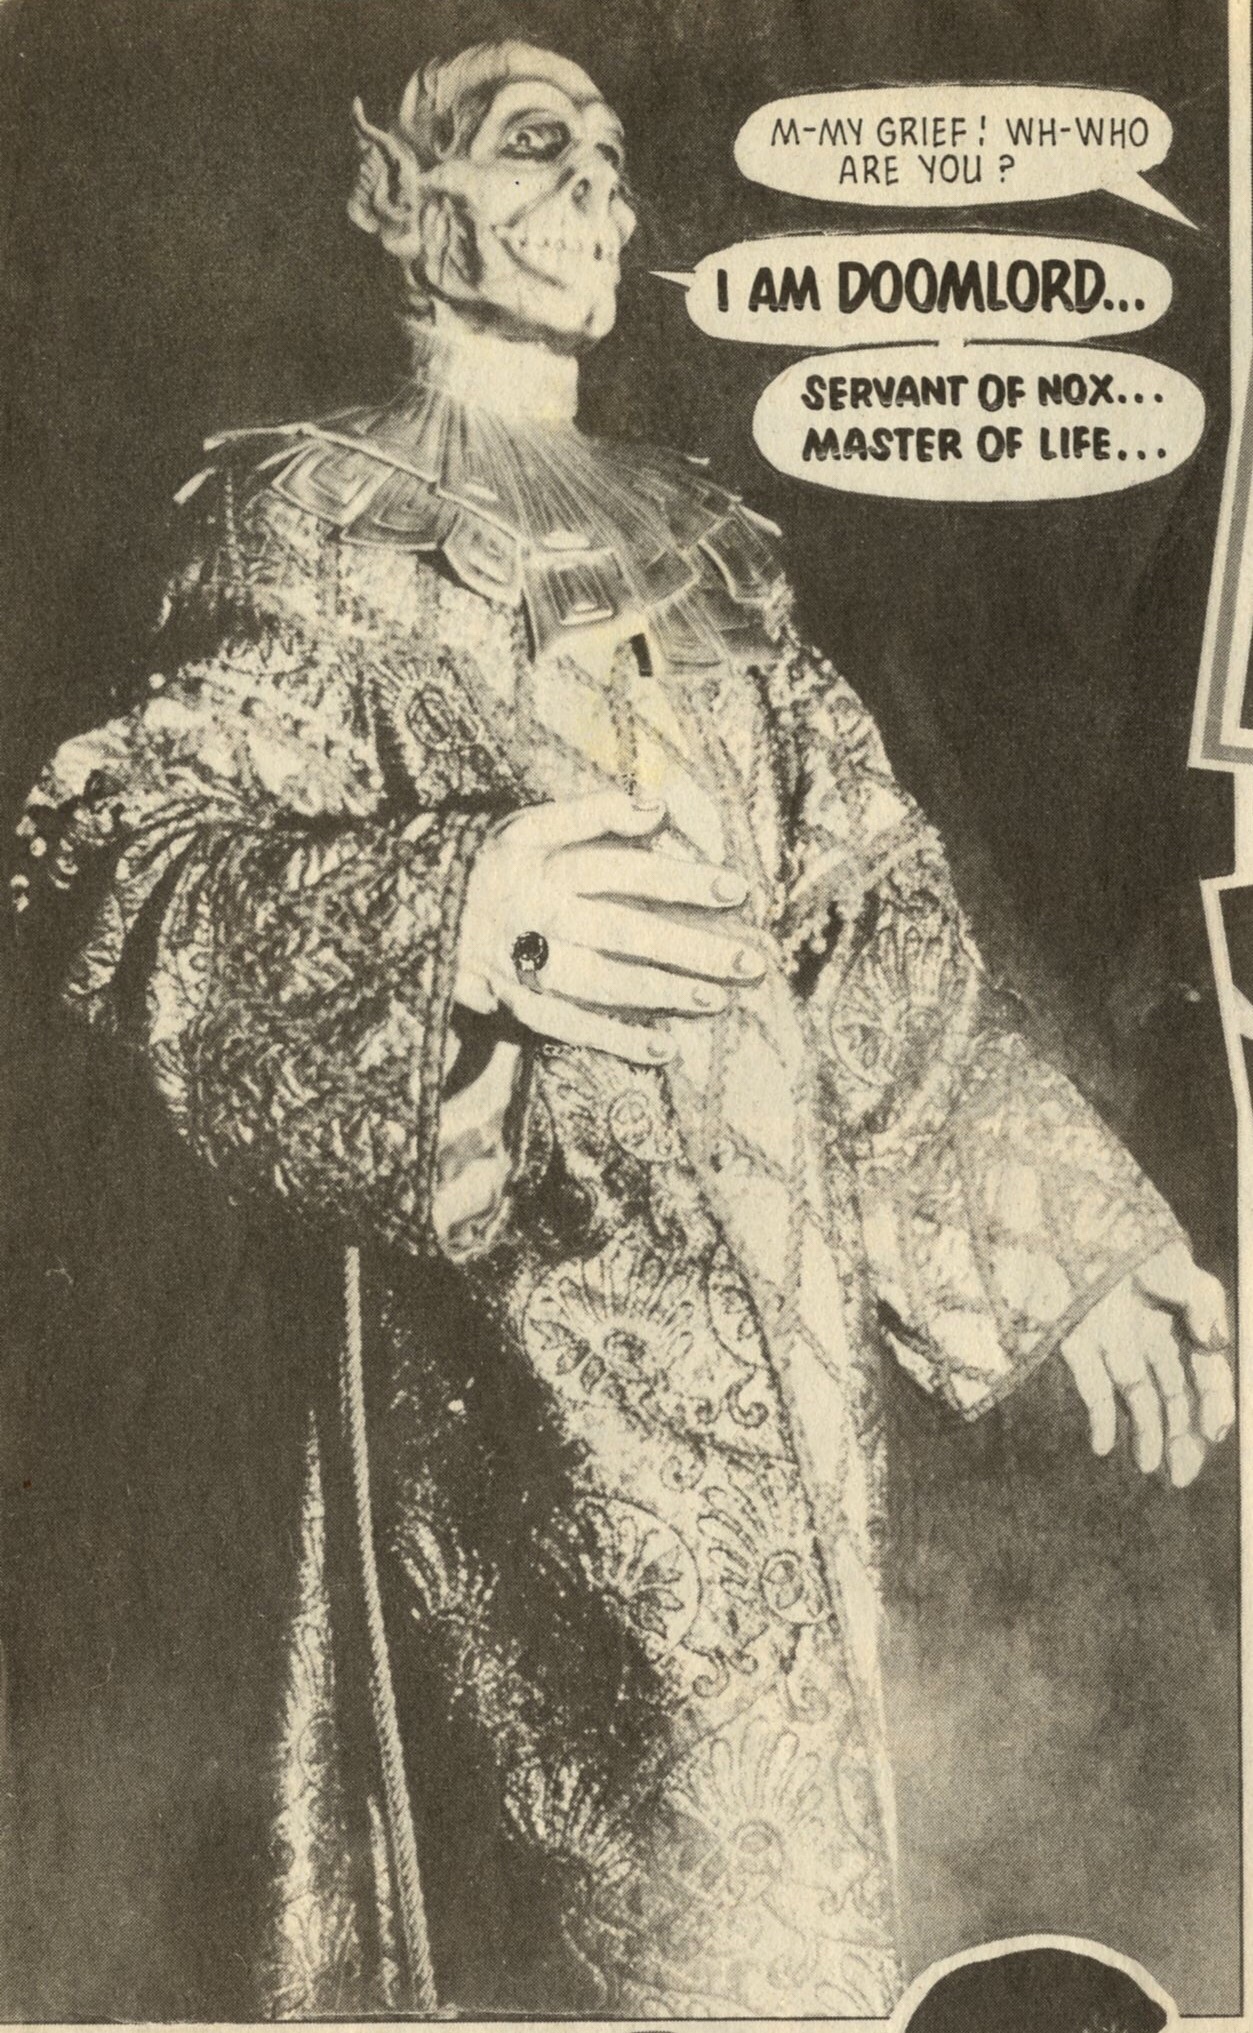 The first appearance of Doomlord, in the 1980s Eagle